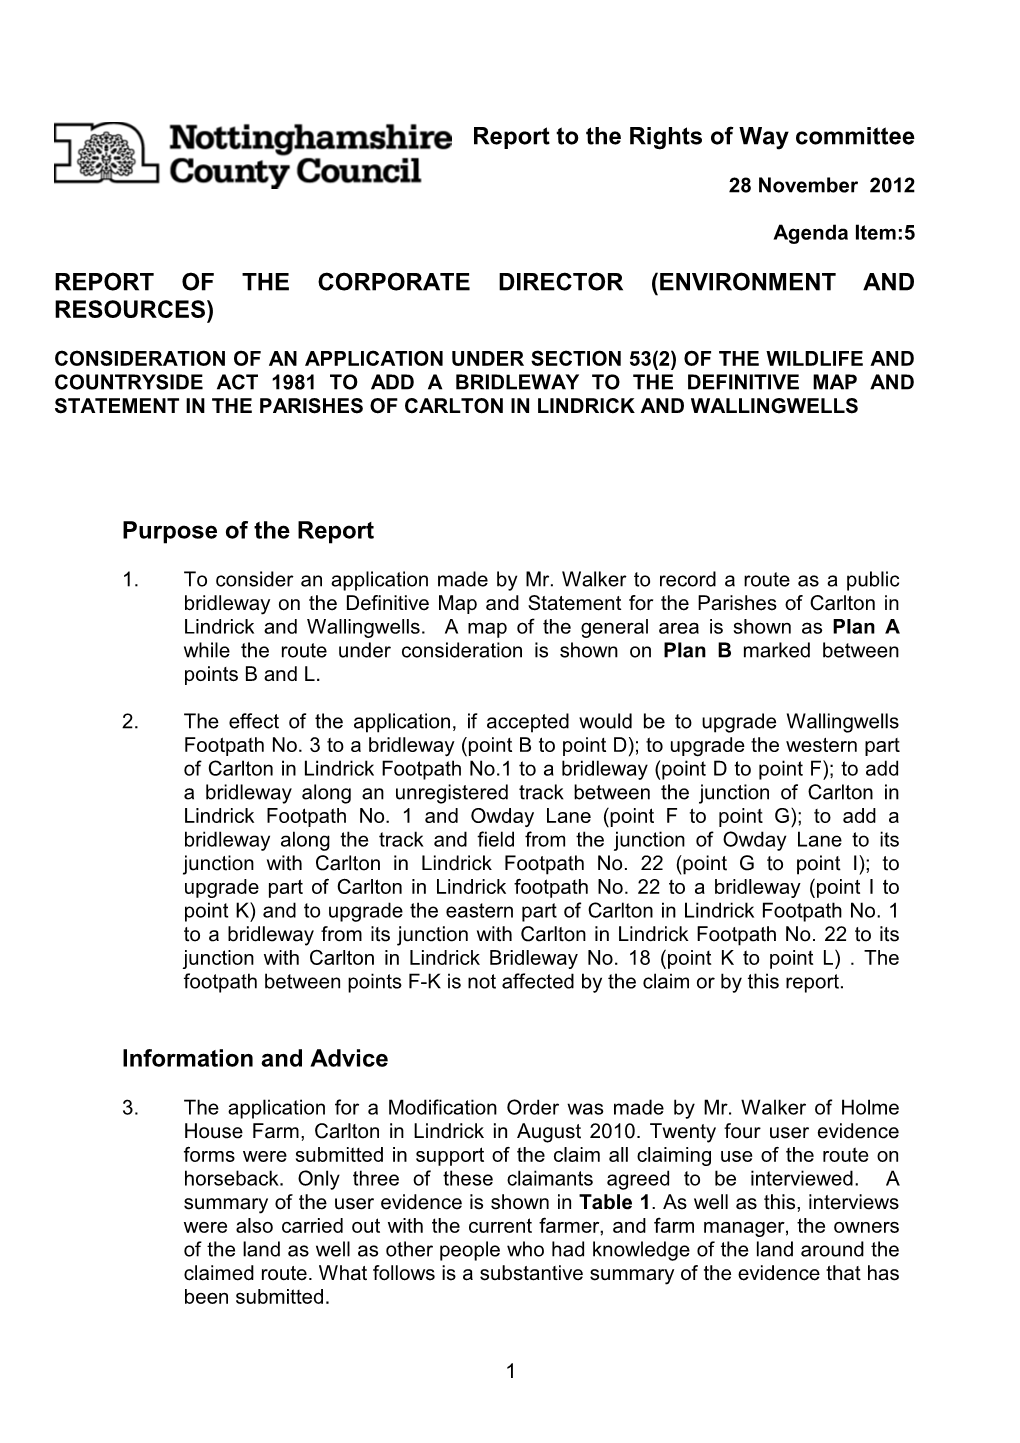 (ENVIRONMENT and RESOURCES) Purpose of the Report Informa